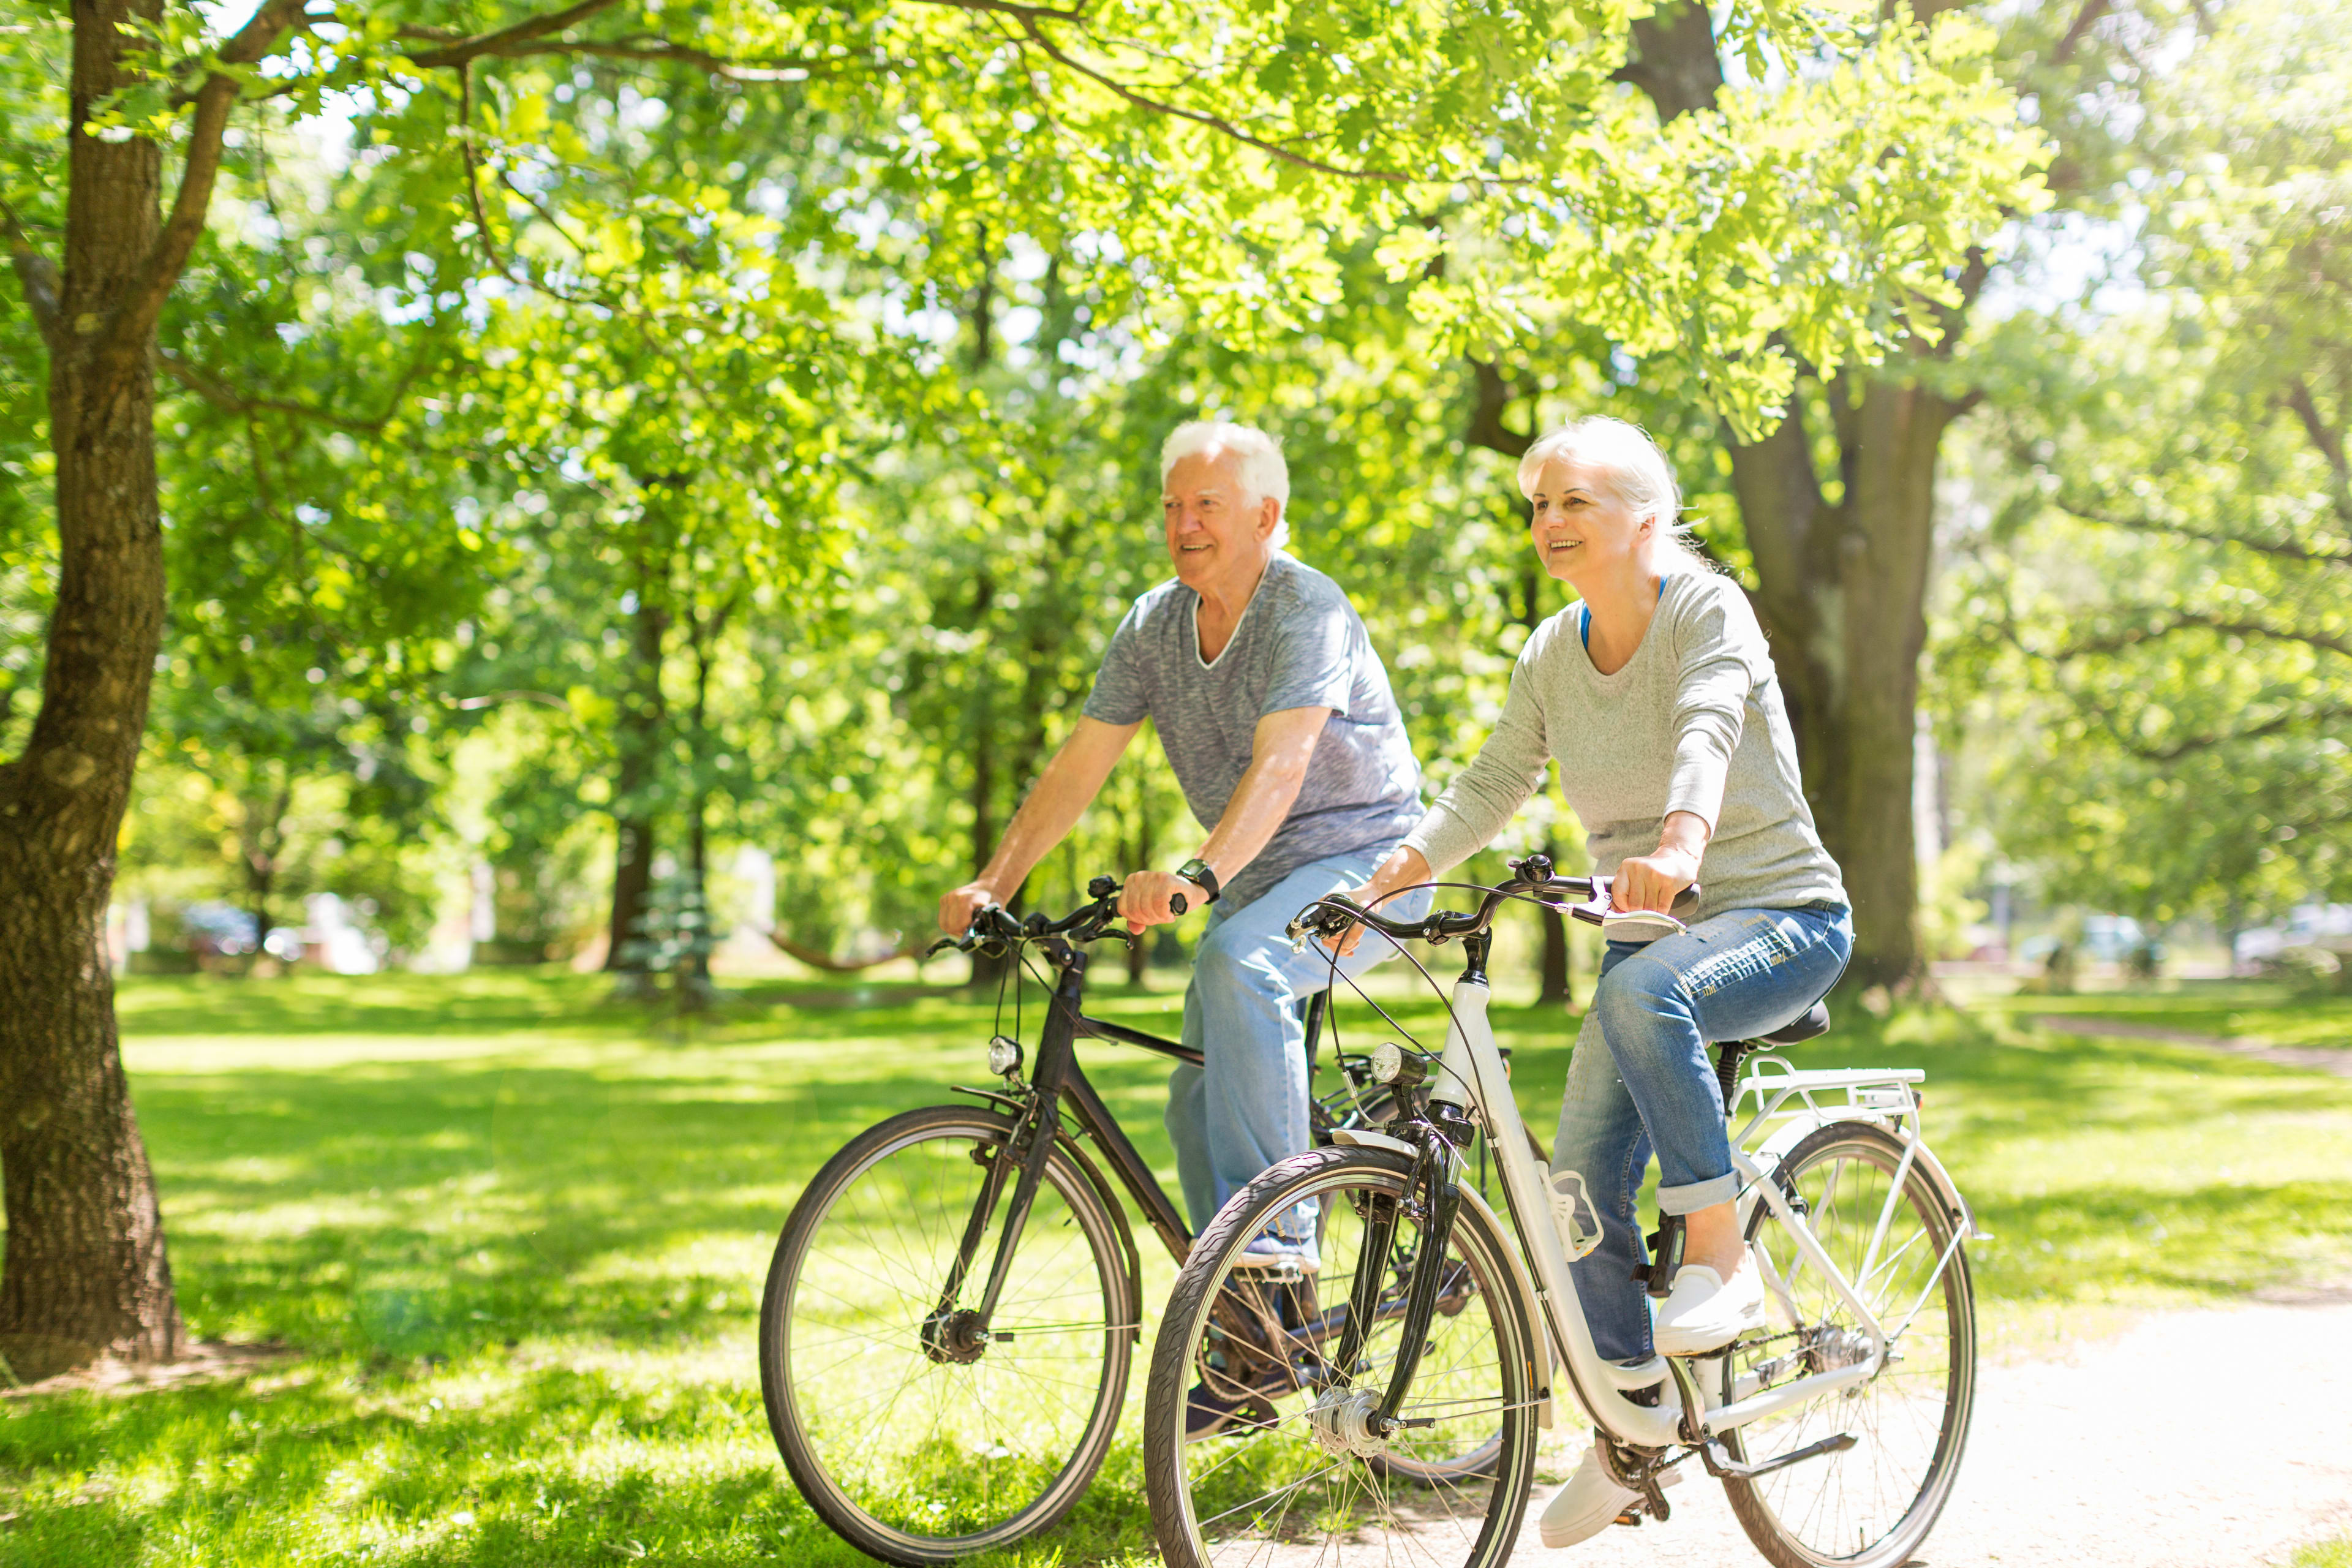 Two elderly people biking on path surrounded by forest